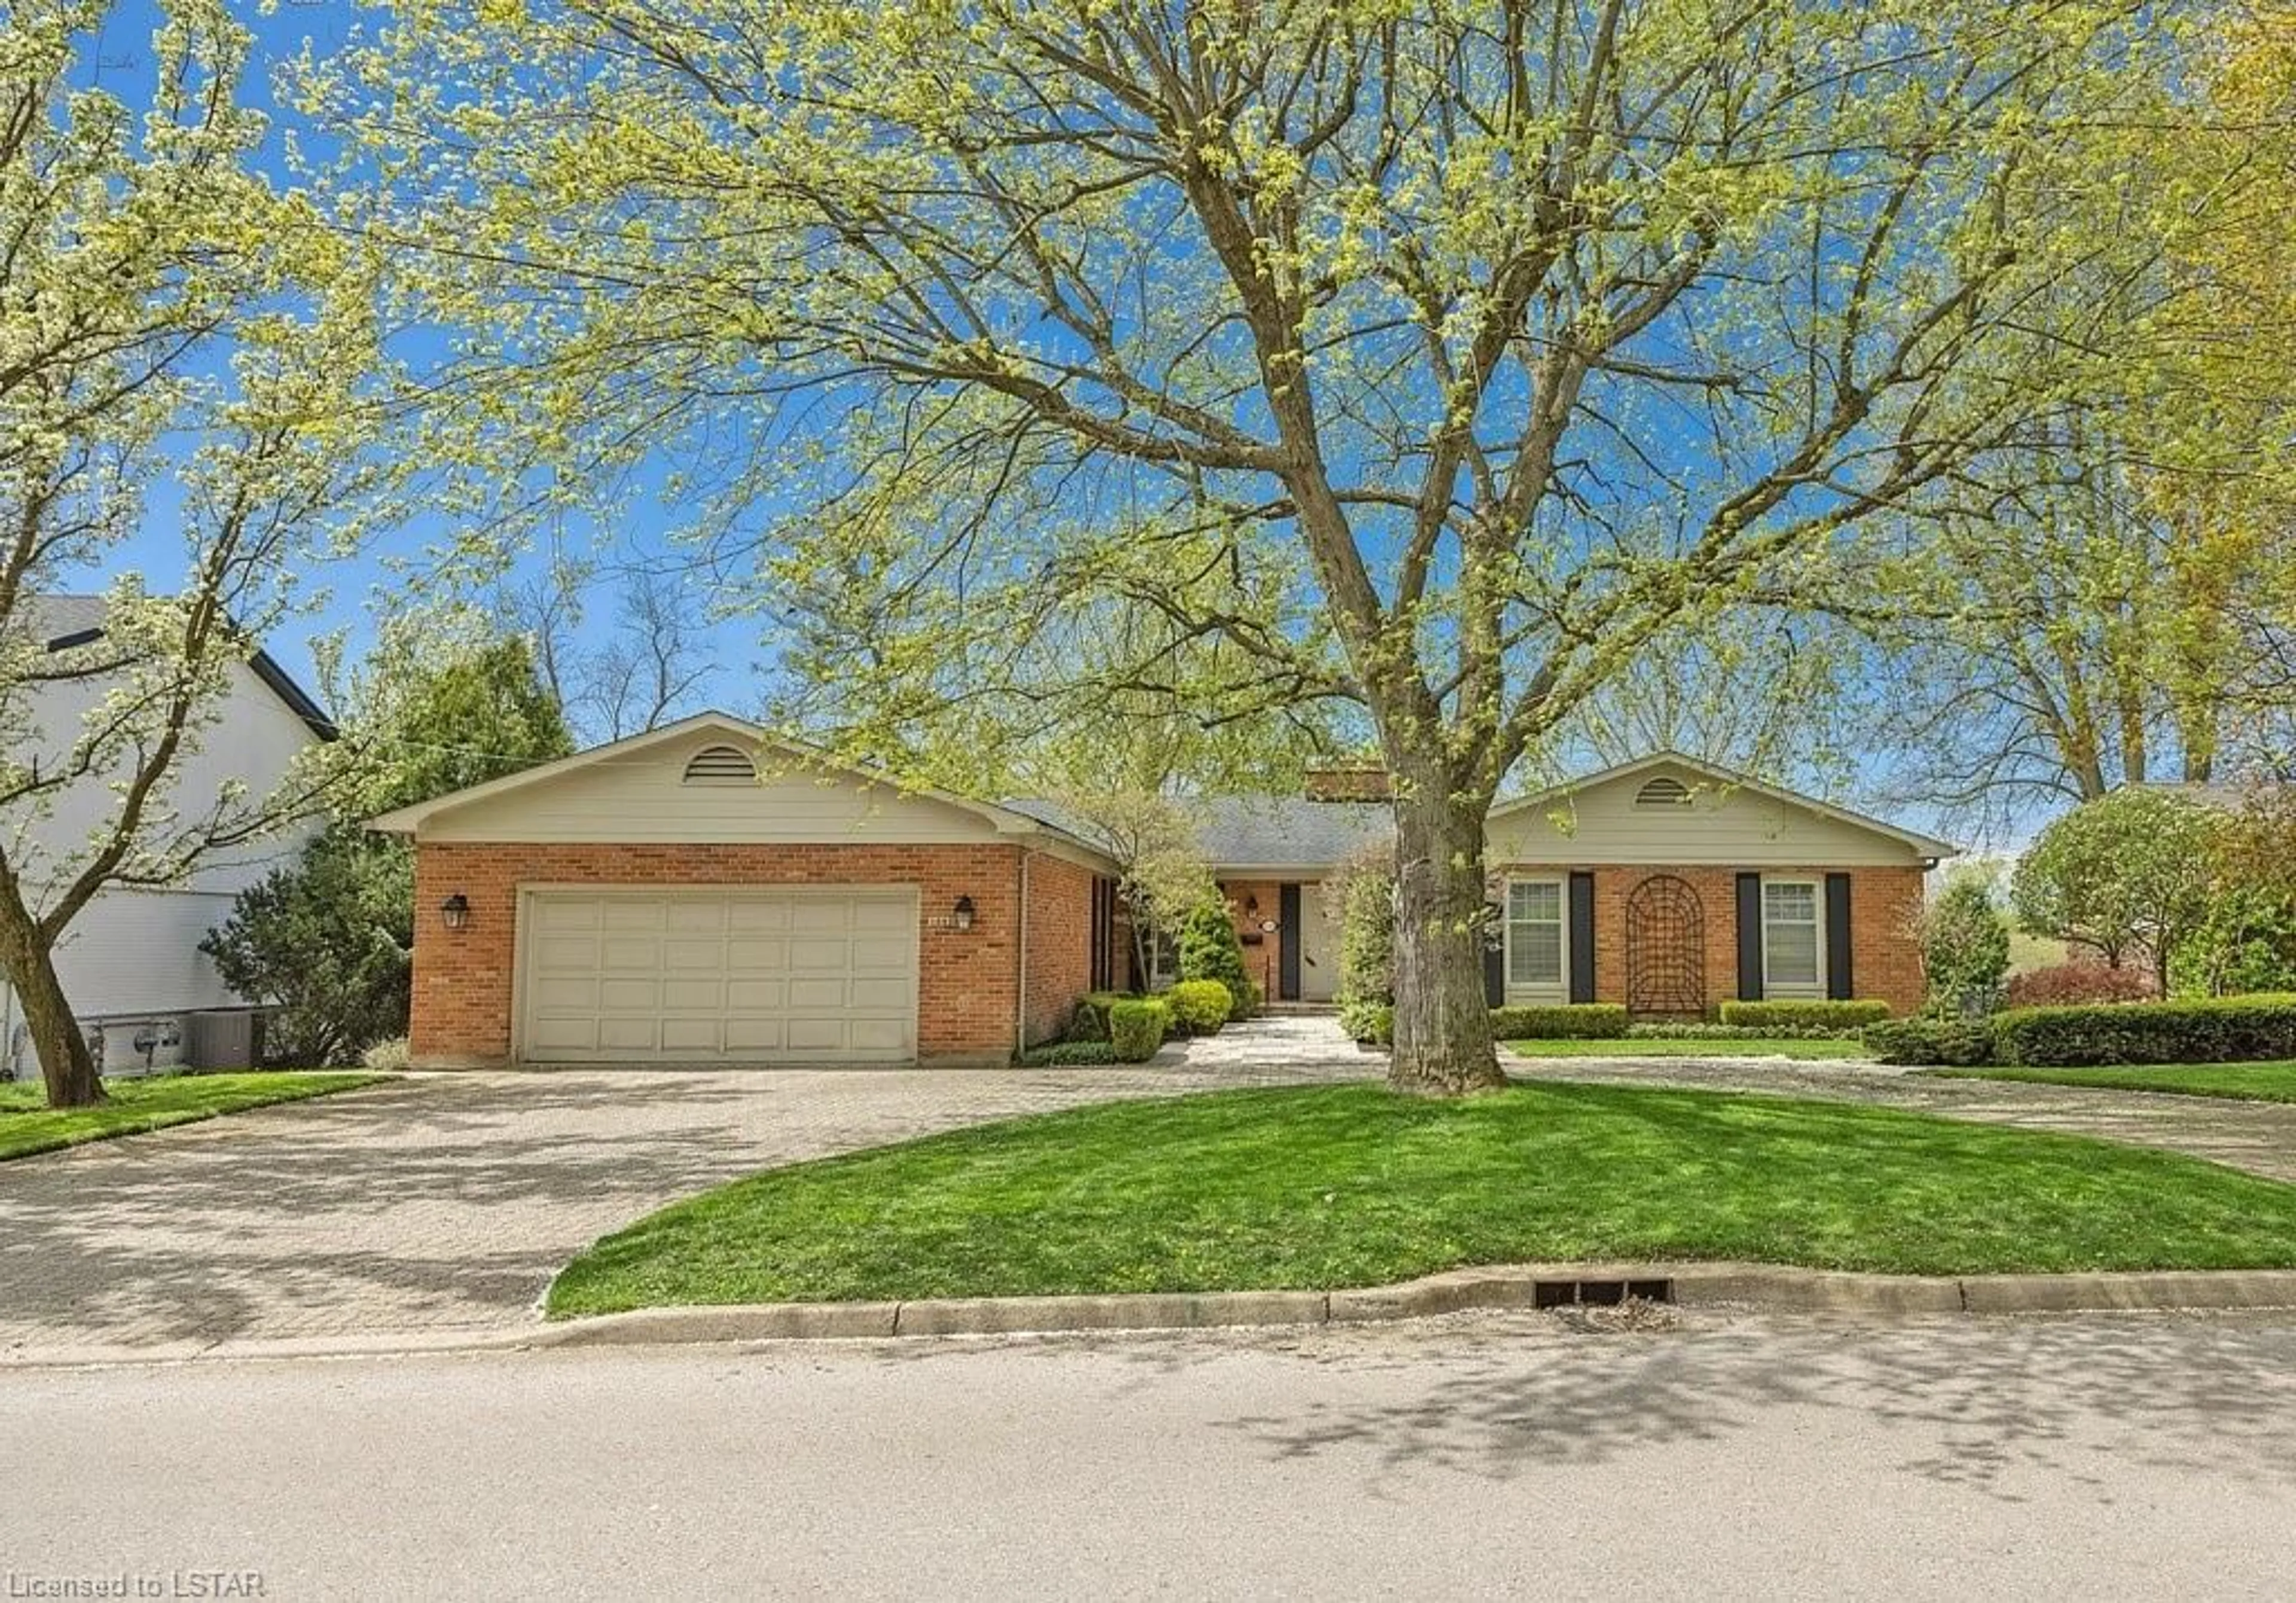 Frontside or backside of a home for 138 Hunt Club Dr, London Ontario N6H 3Y7